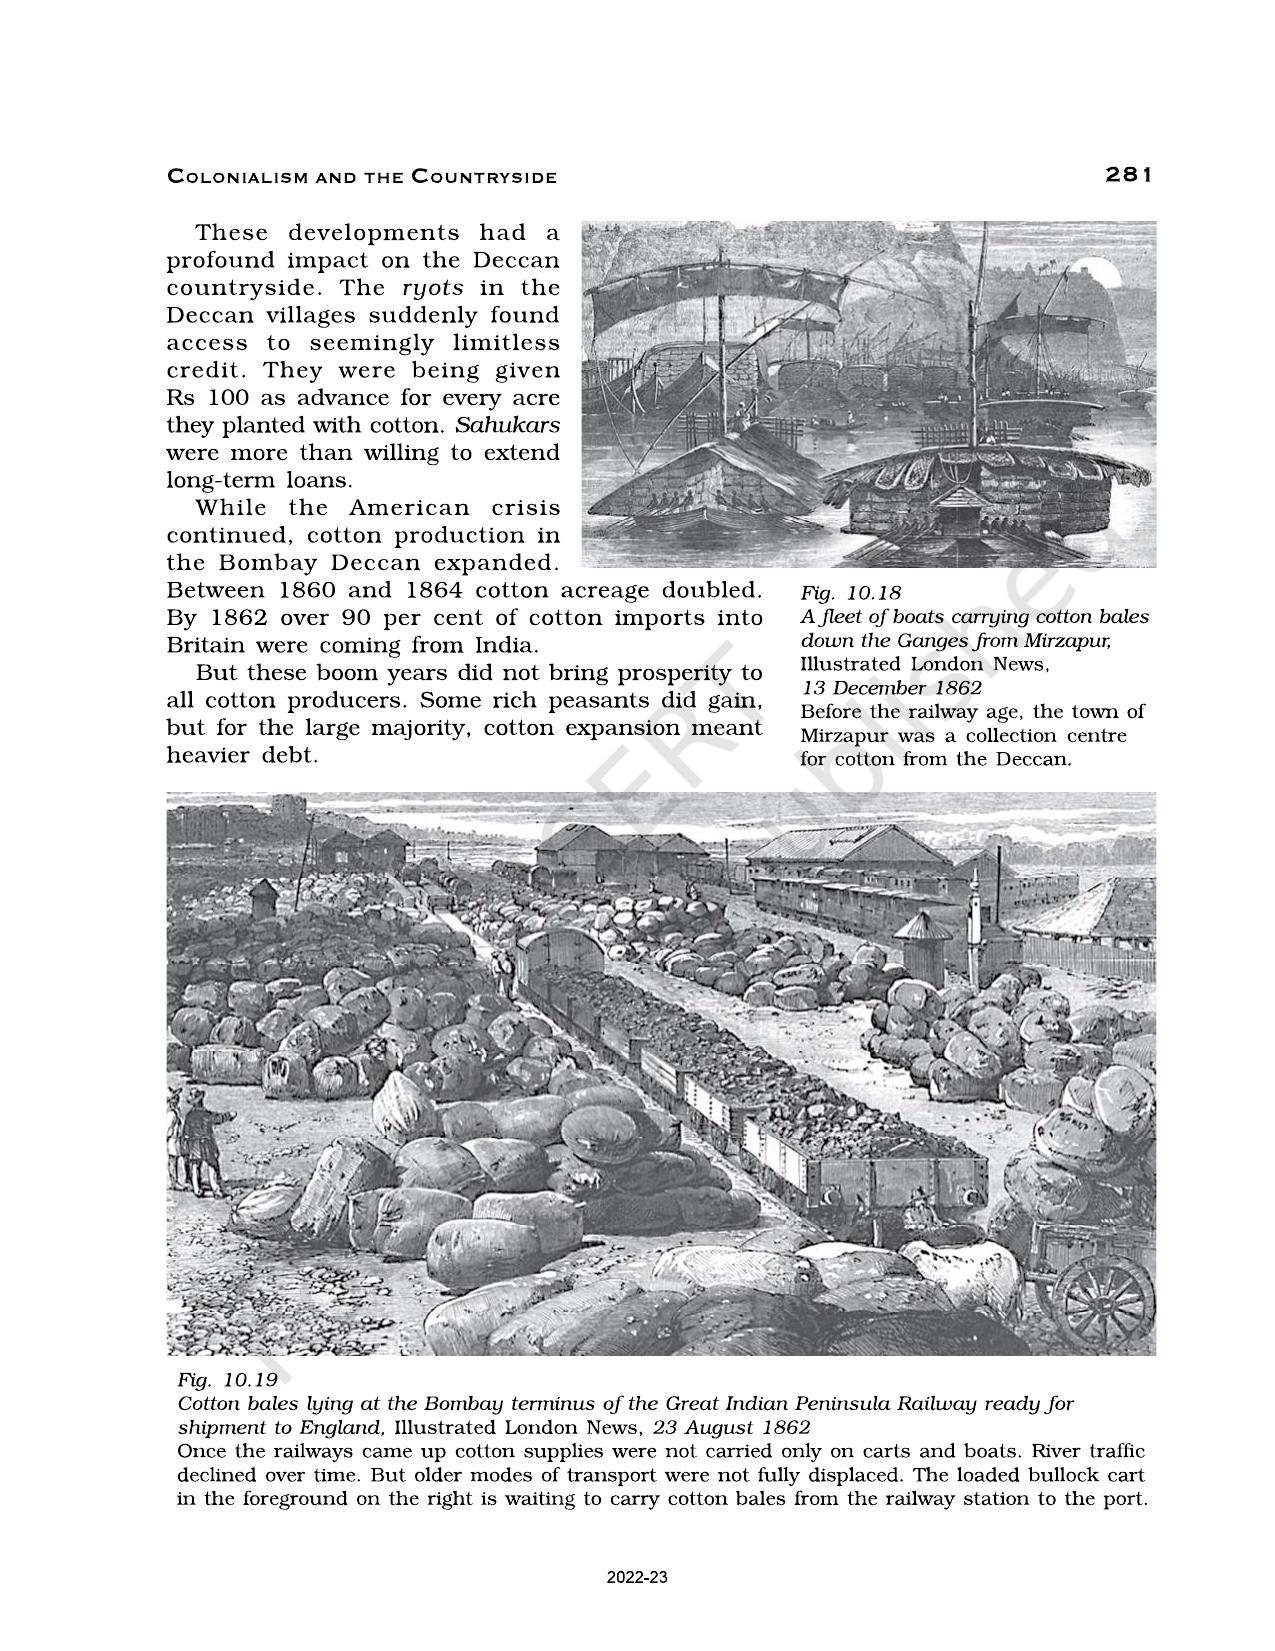 NCERT Book for Class 12 History (Part-II) Chapter 10 Colonialism and the Countryside - Page 25